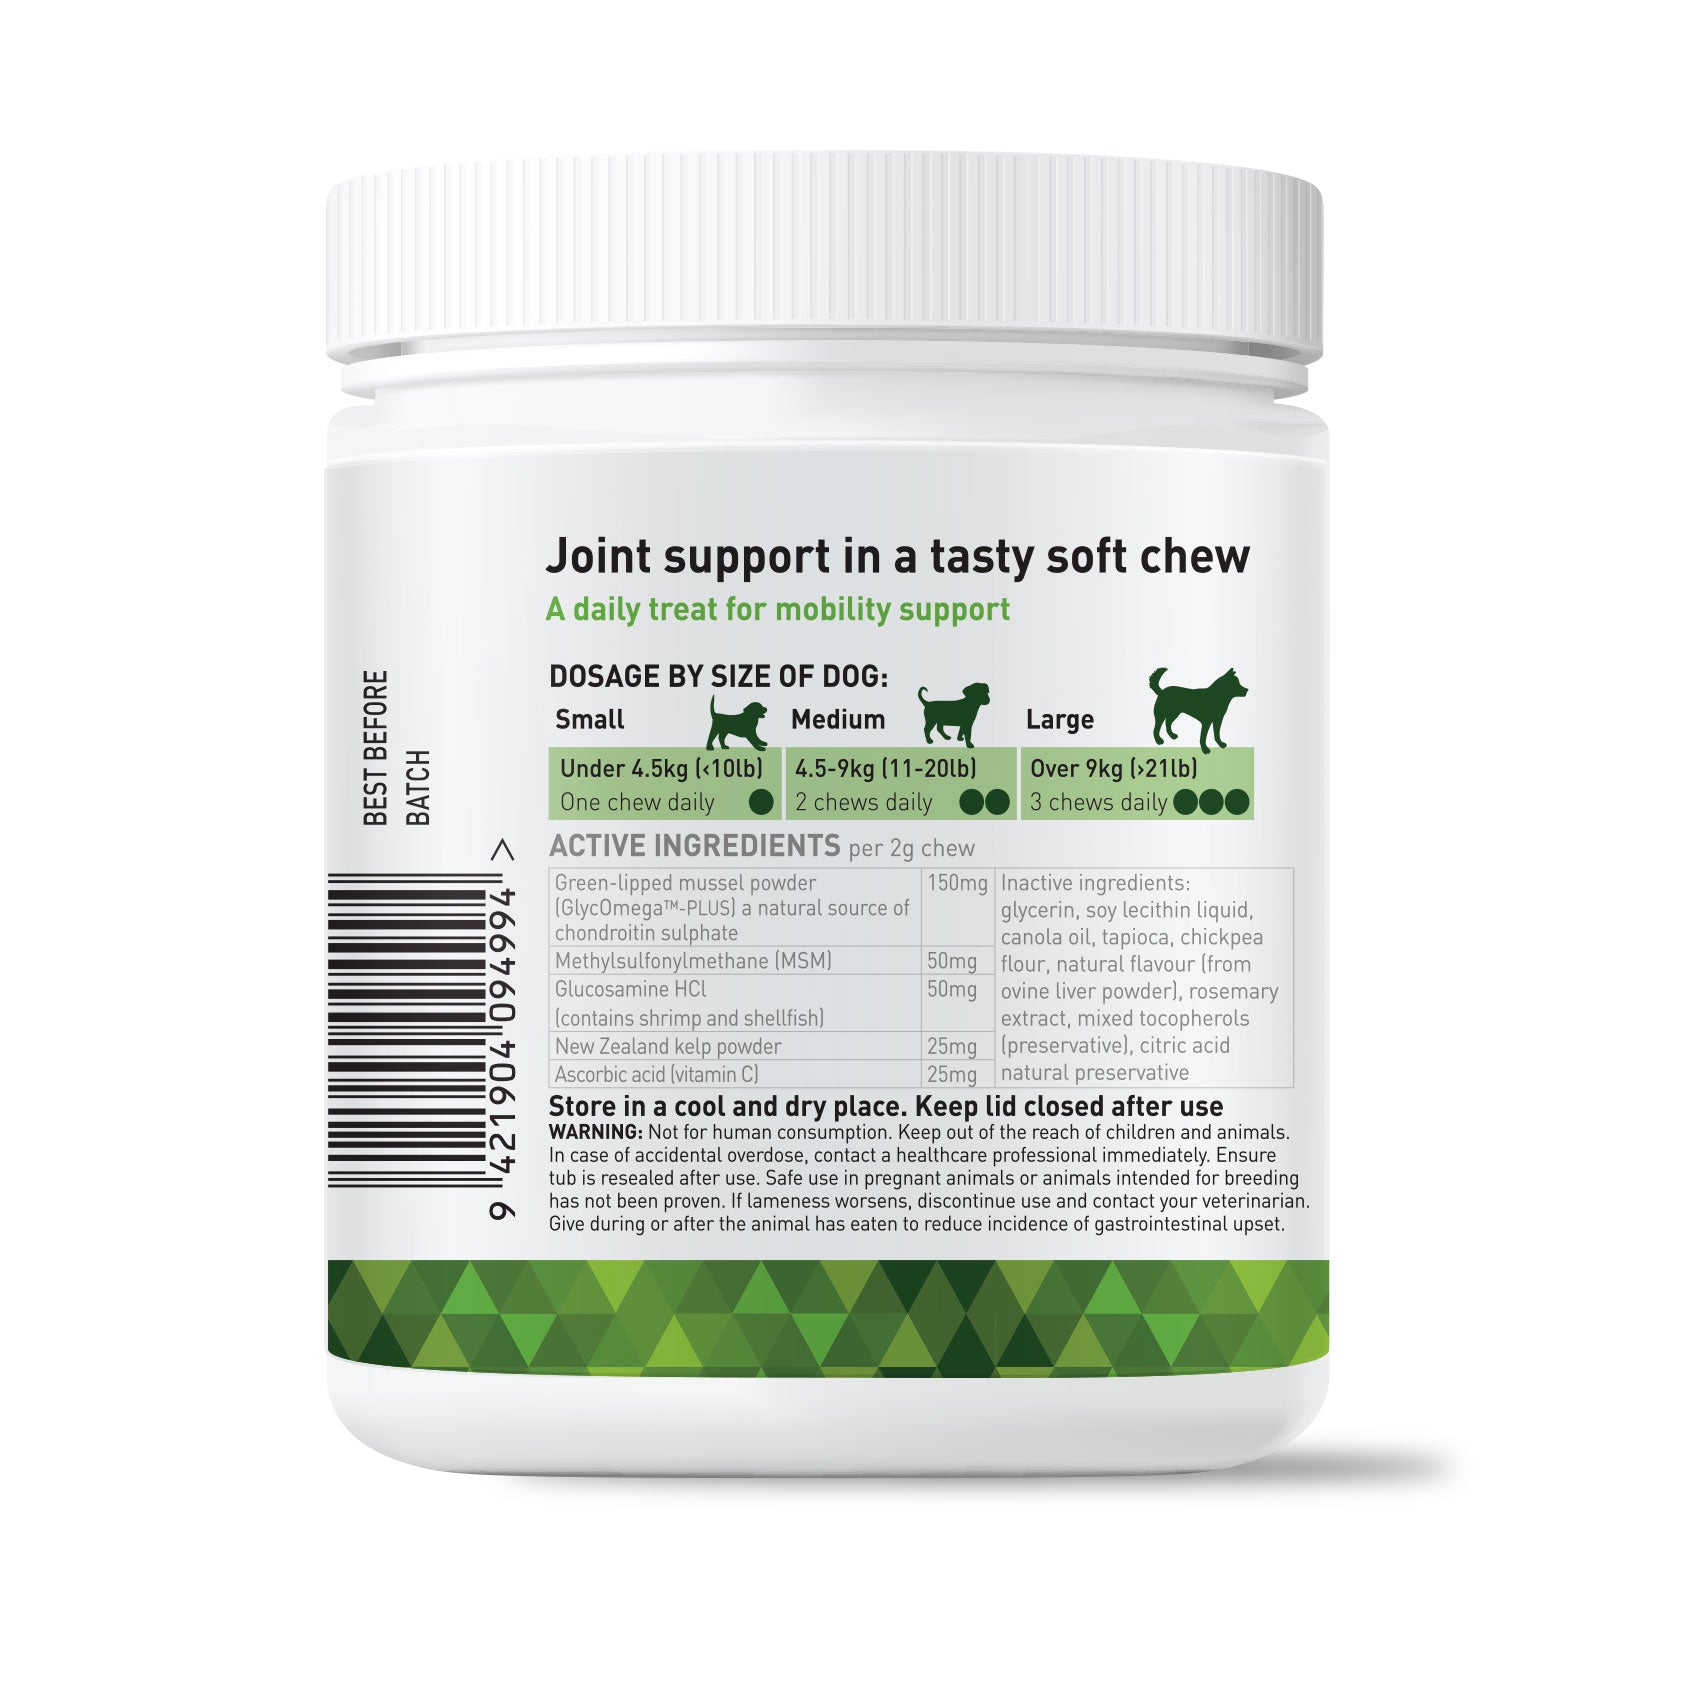 Joint support soft chews for dogs and puppies. Actively supporting healthy dog joints. Hip and joint soft chews  mobility supplement for puppy health. With GlycOmega-PLUS green-lipped mussel powder. For small or young dogs. Joint support with green-lipped mussel powder. Rich in omega 3, chondroitin and glucosamine for dogs and young puppies.